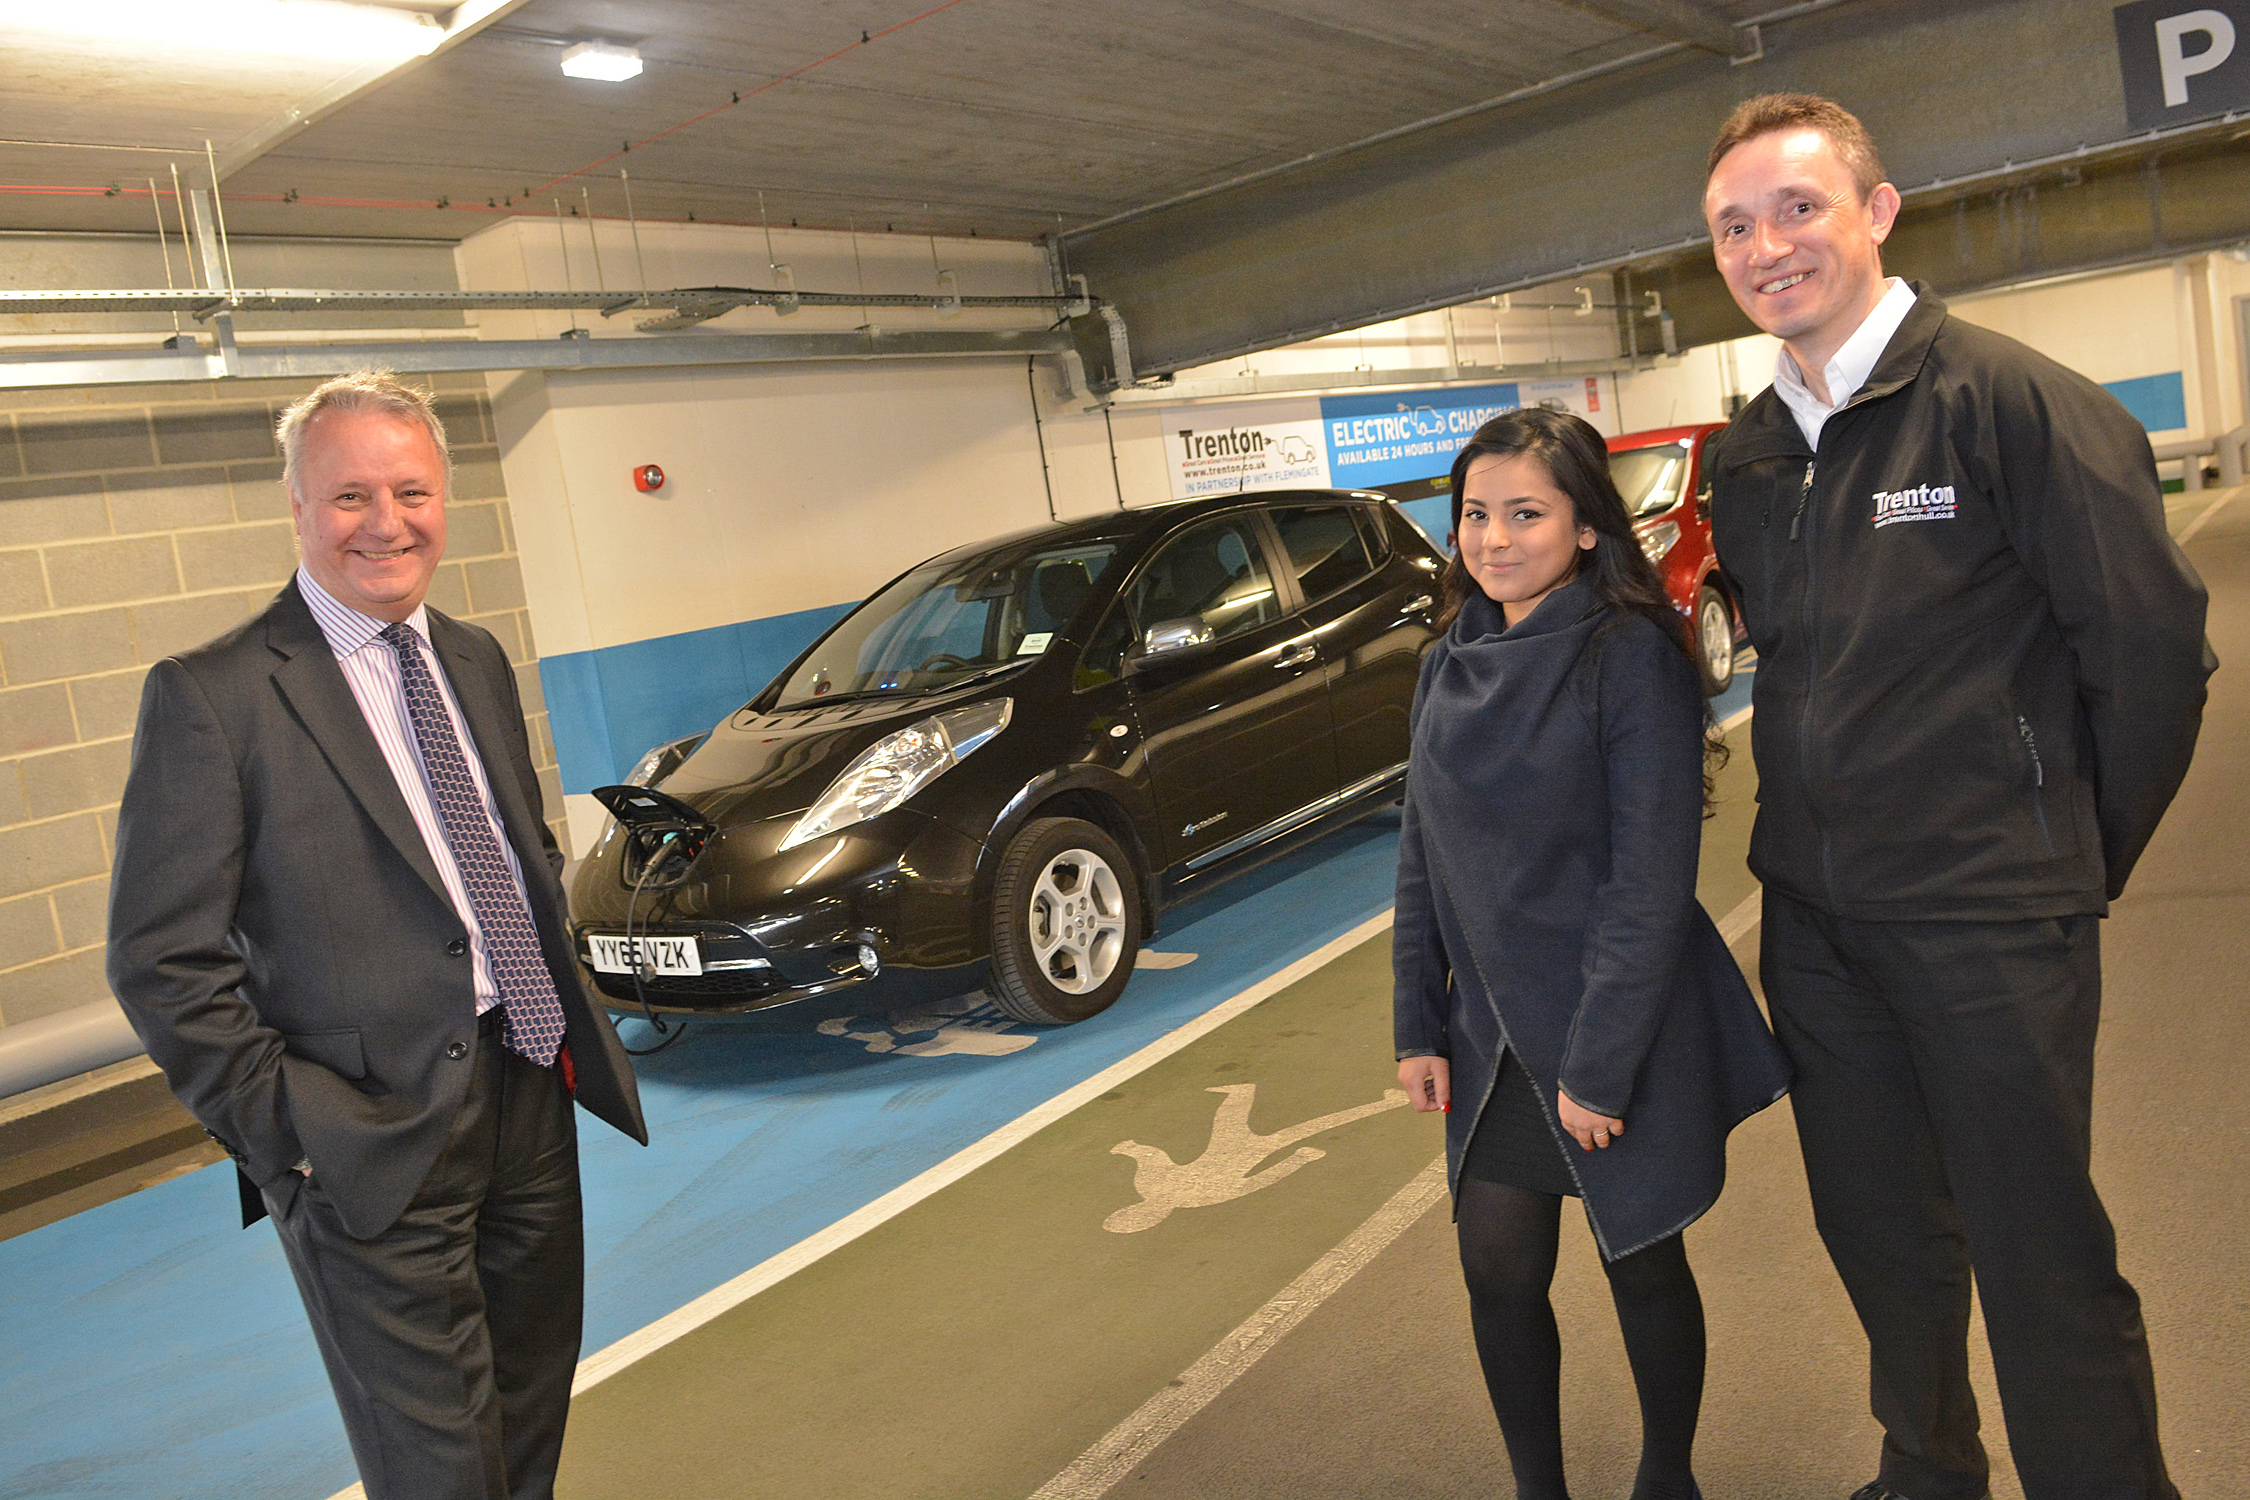  Graham Tait, centre mananger of Flemingate in Beverley, charges up a car from one of the three free the electric charging points in the car park. With Graham are Taslima Tarafdar and Ian Tattersall from Trenton. Pic Simon Kench (Trudi Words)